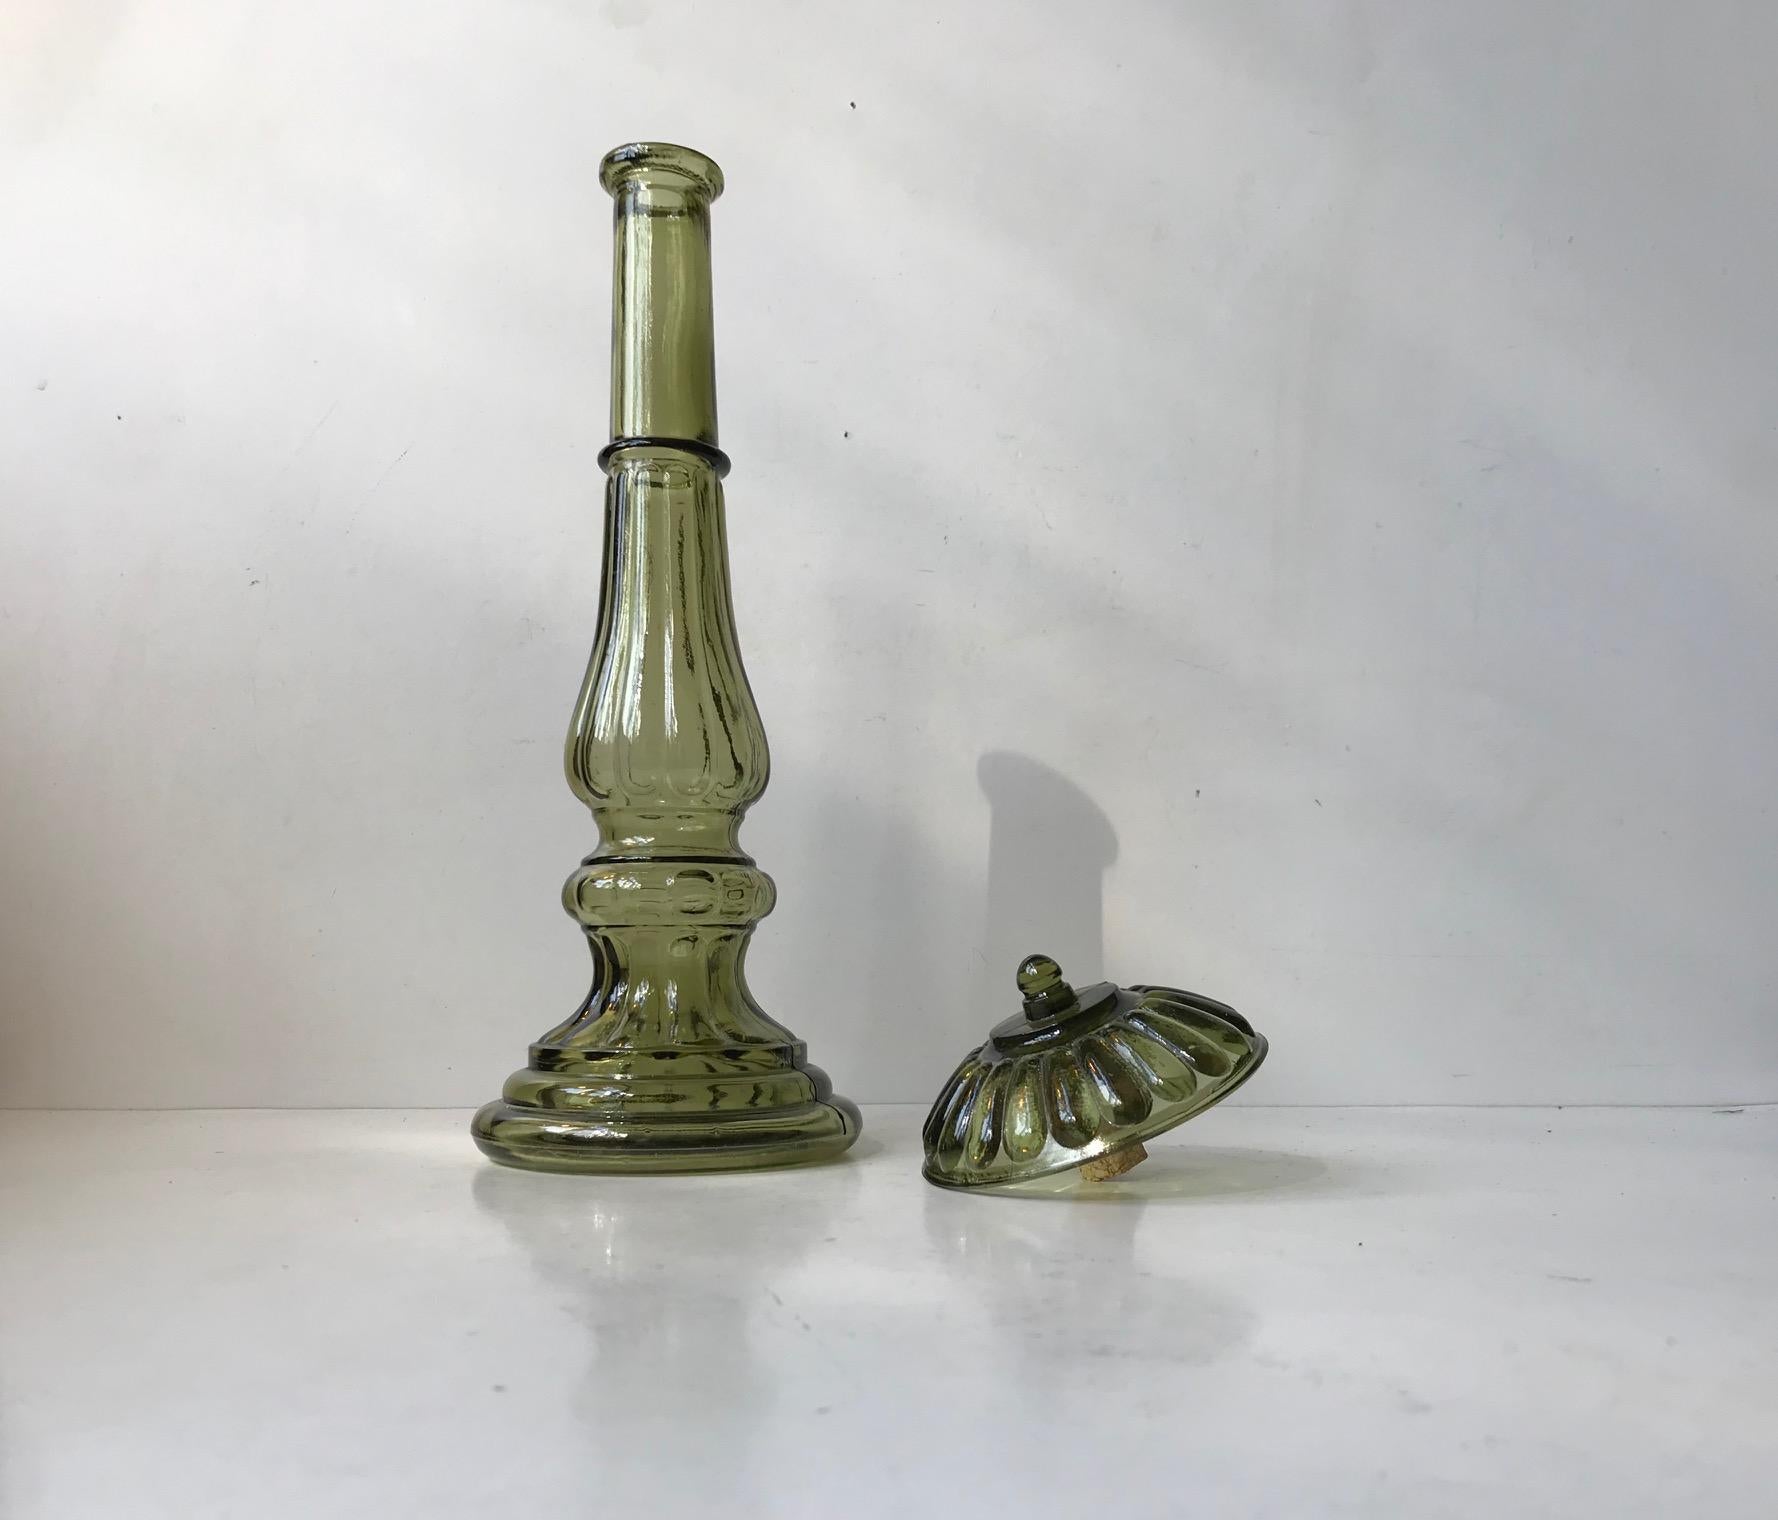 Architecturally shaped olive green glass decater. Designed and manufactured by Empoli in Italy during the early 1970s. Capacity 0.6-0.7 liters. It is marked Made in Italy to its base. Measurements: H: 34 cm, D: 10 cm.